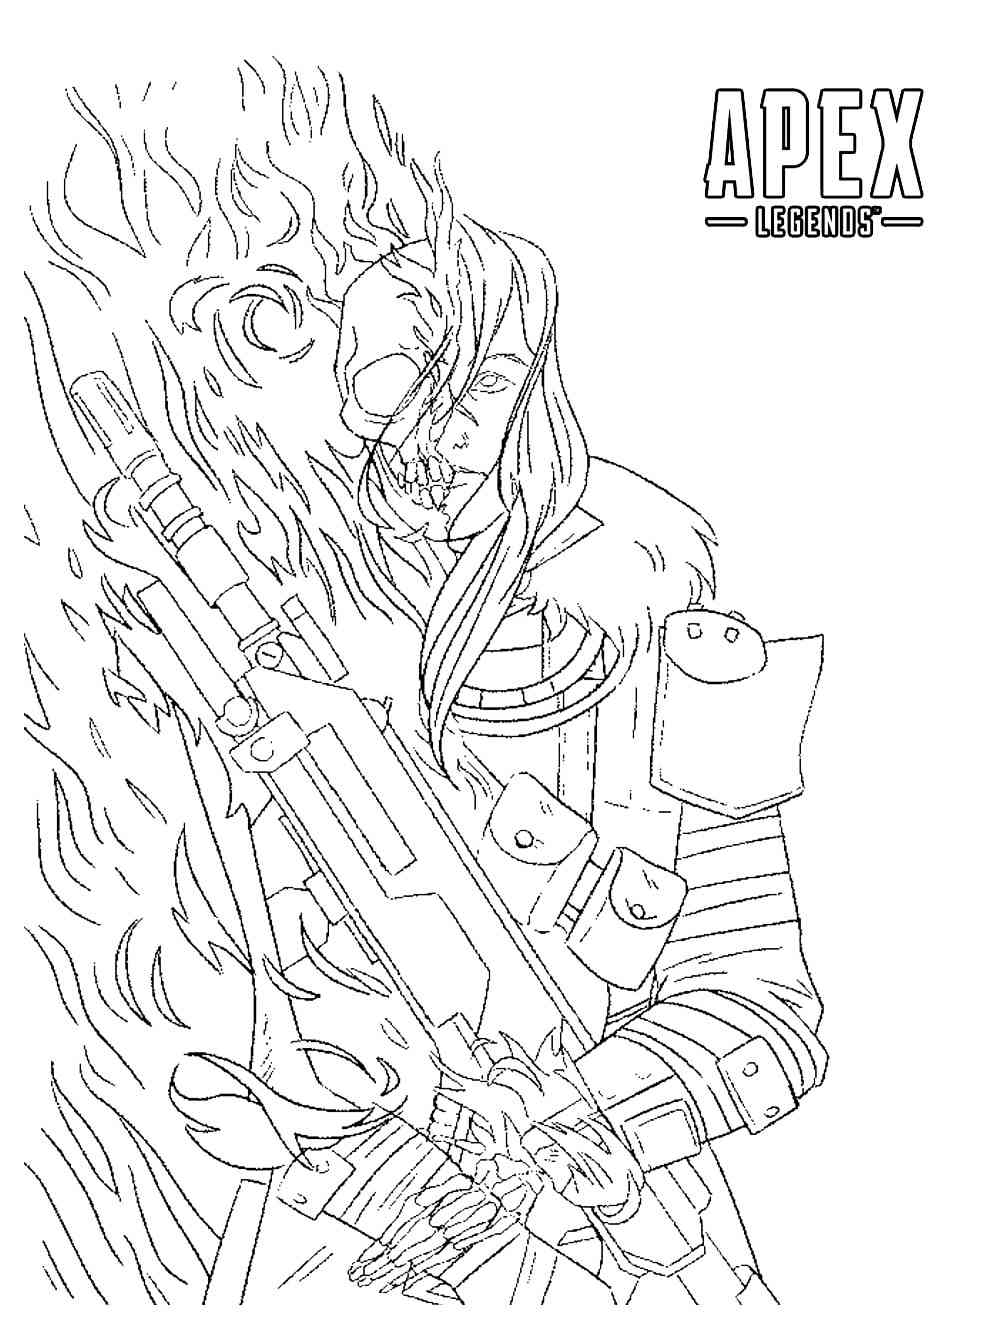 Game Apex Legends coloring page